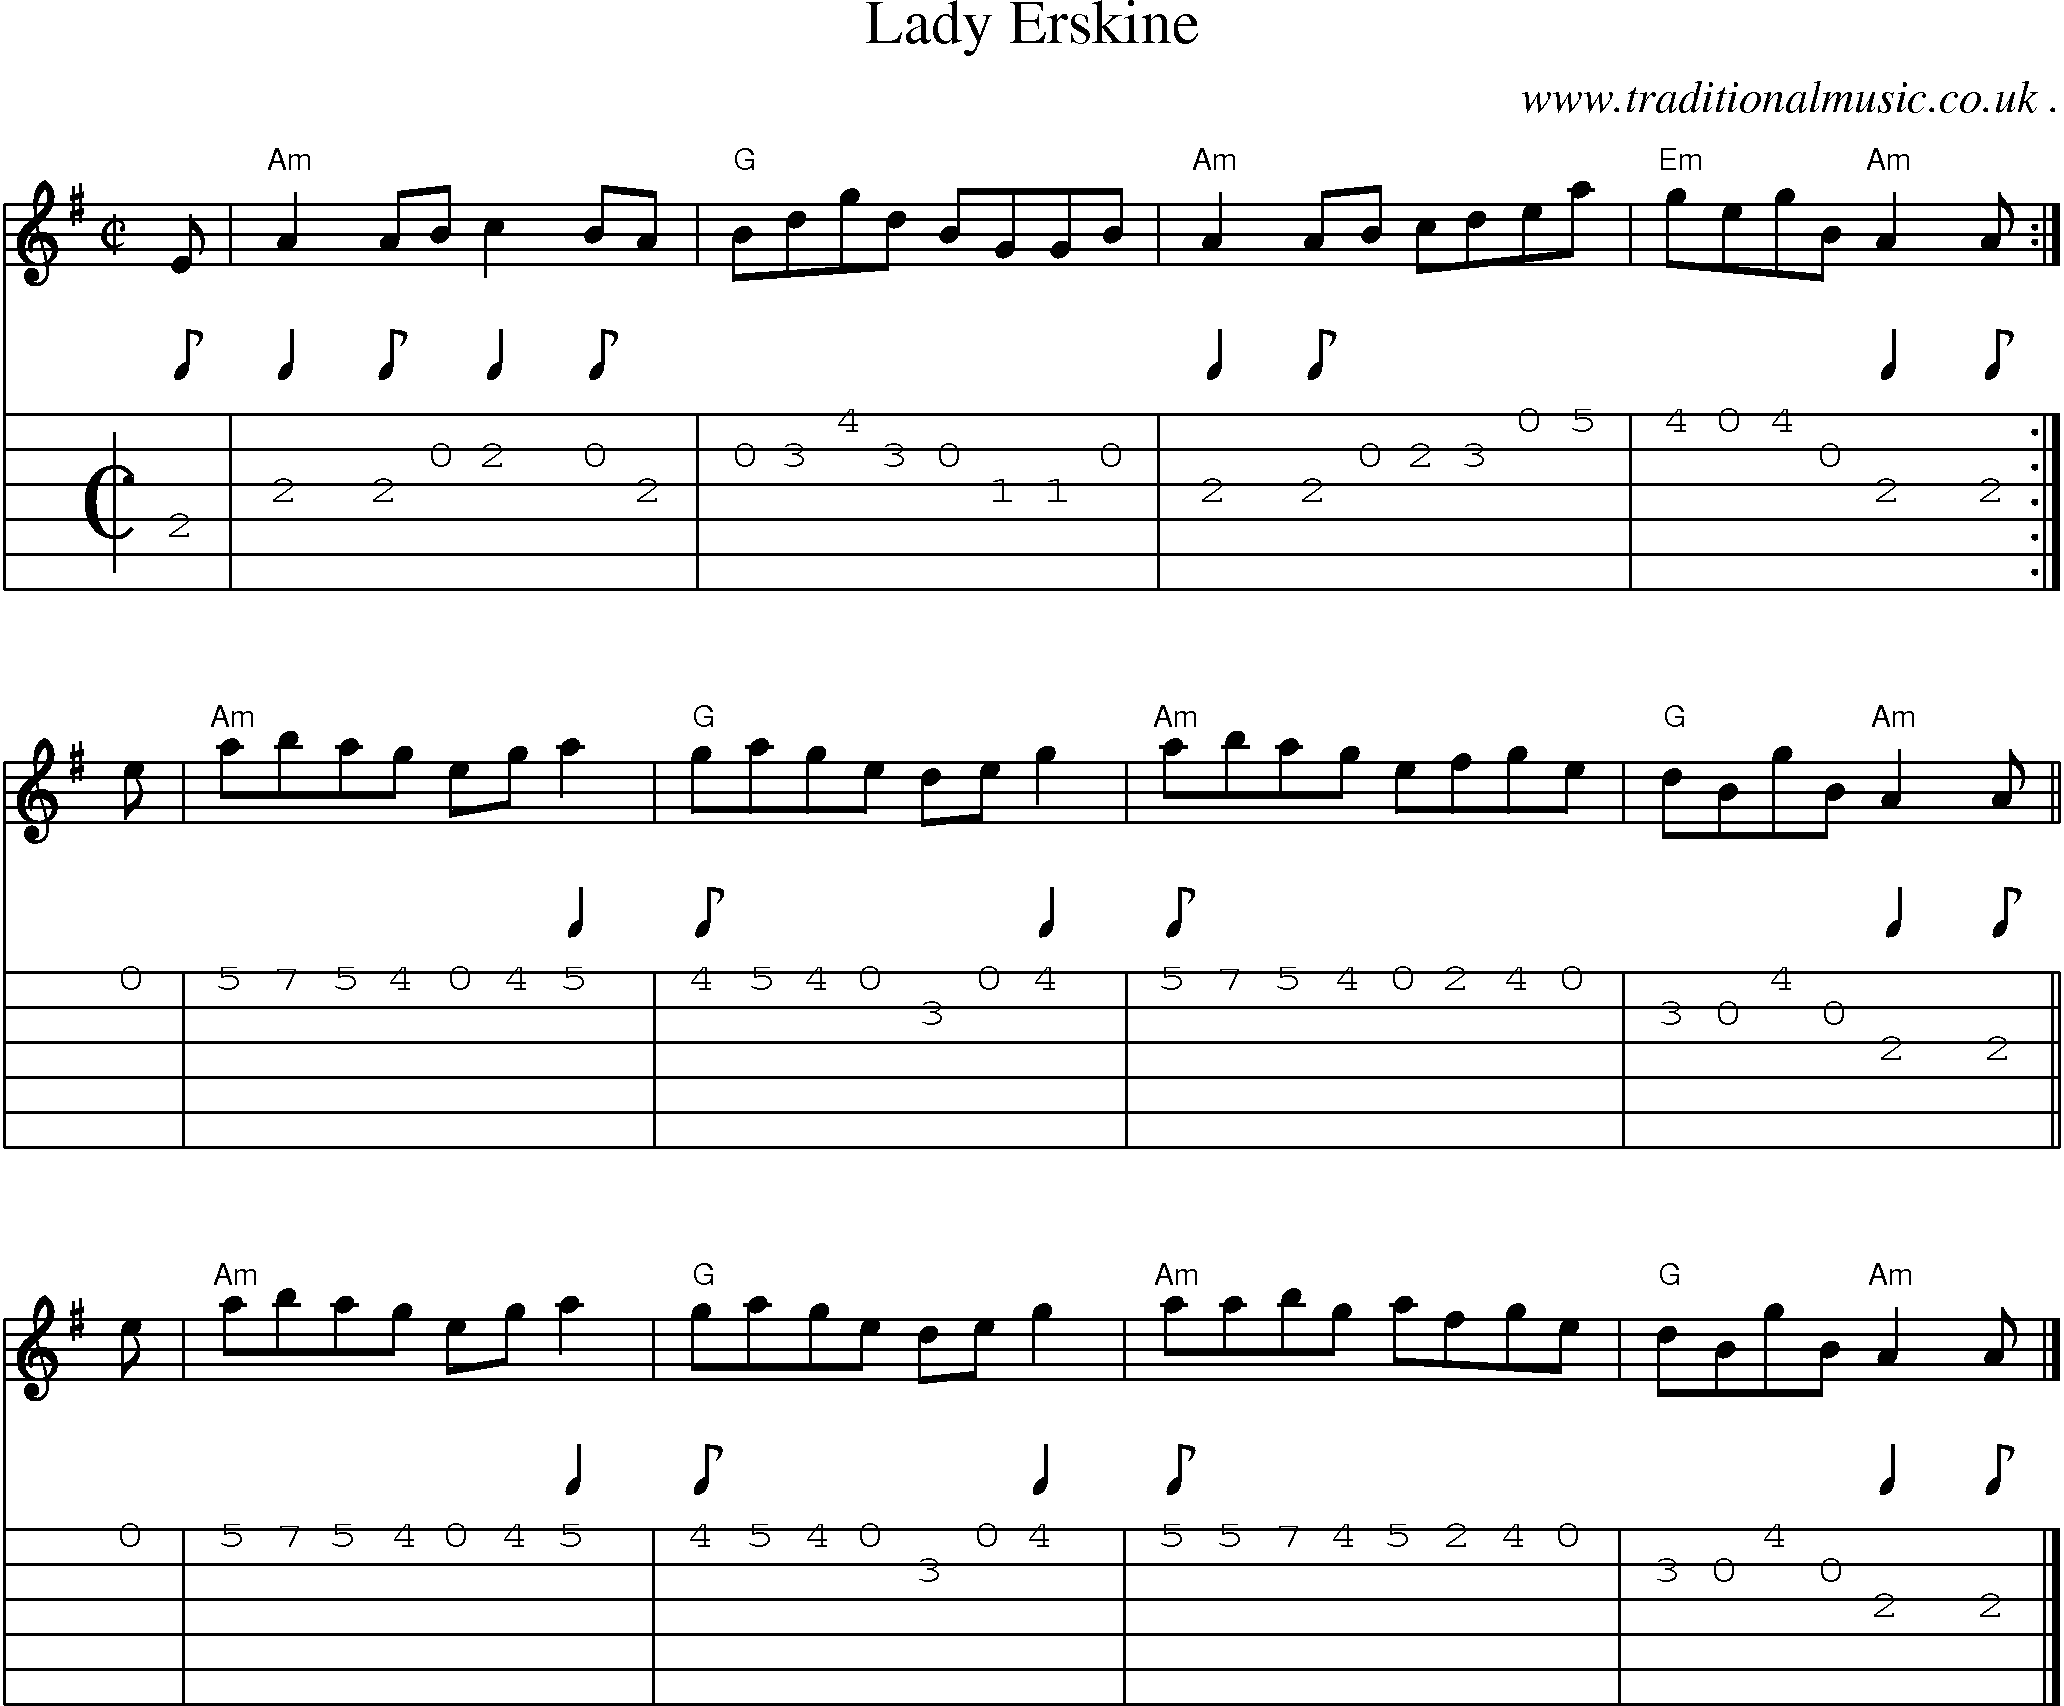 Sheet-music  score, Chords and Guitar Tabs for Lady Erskine